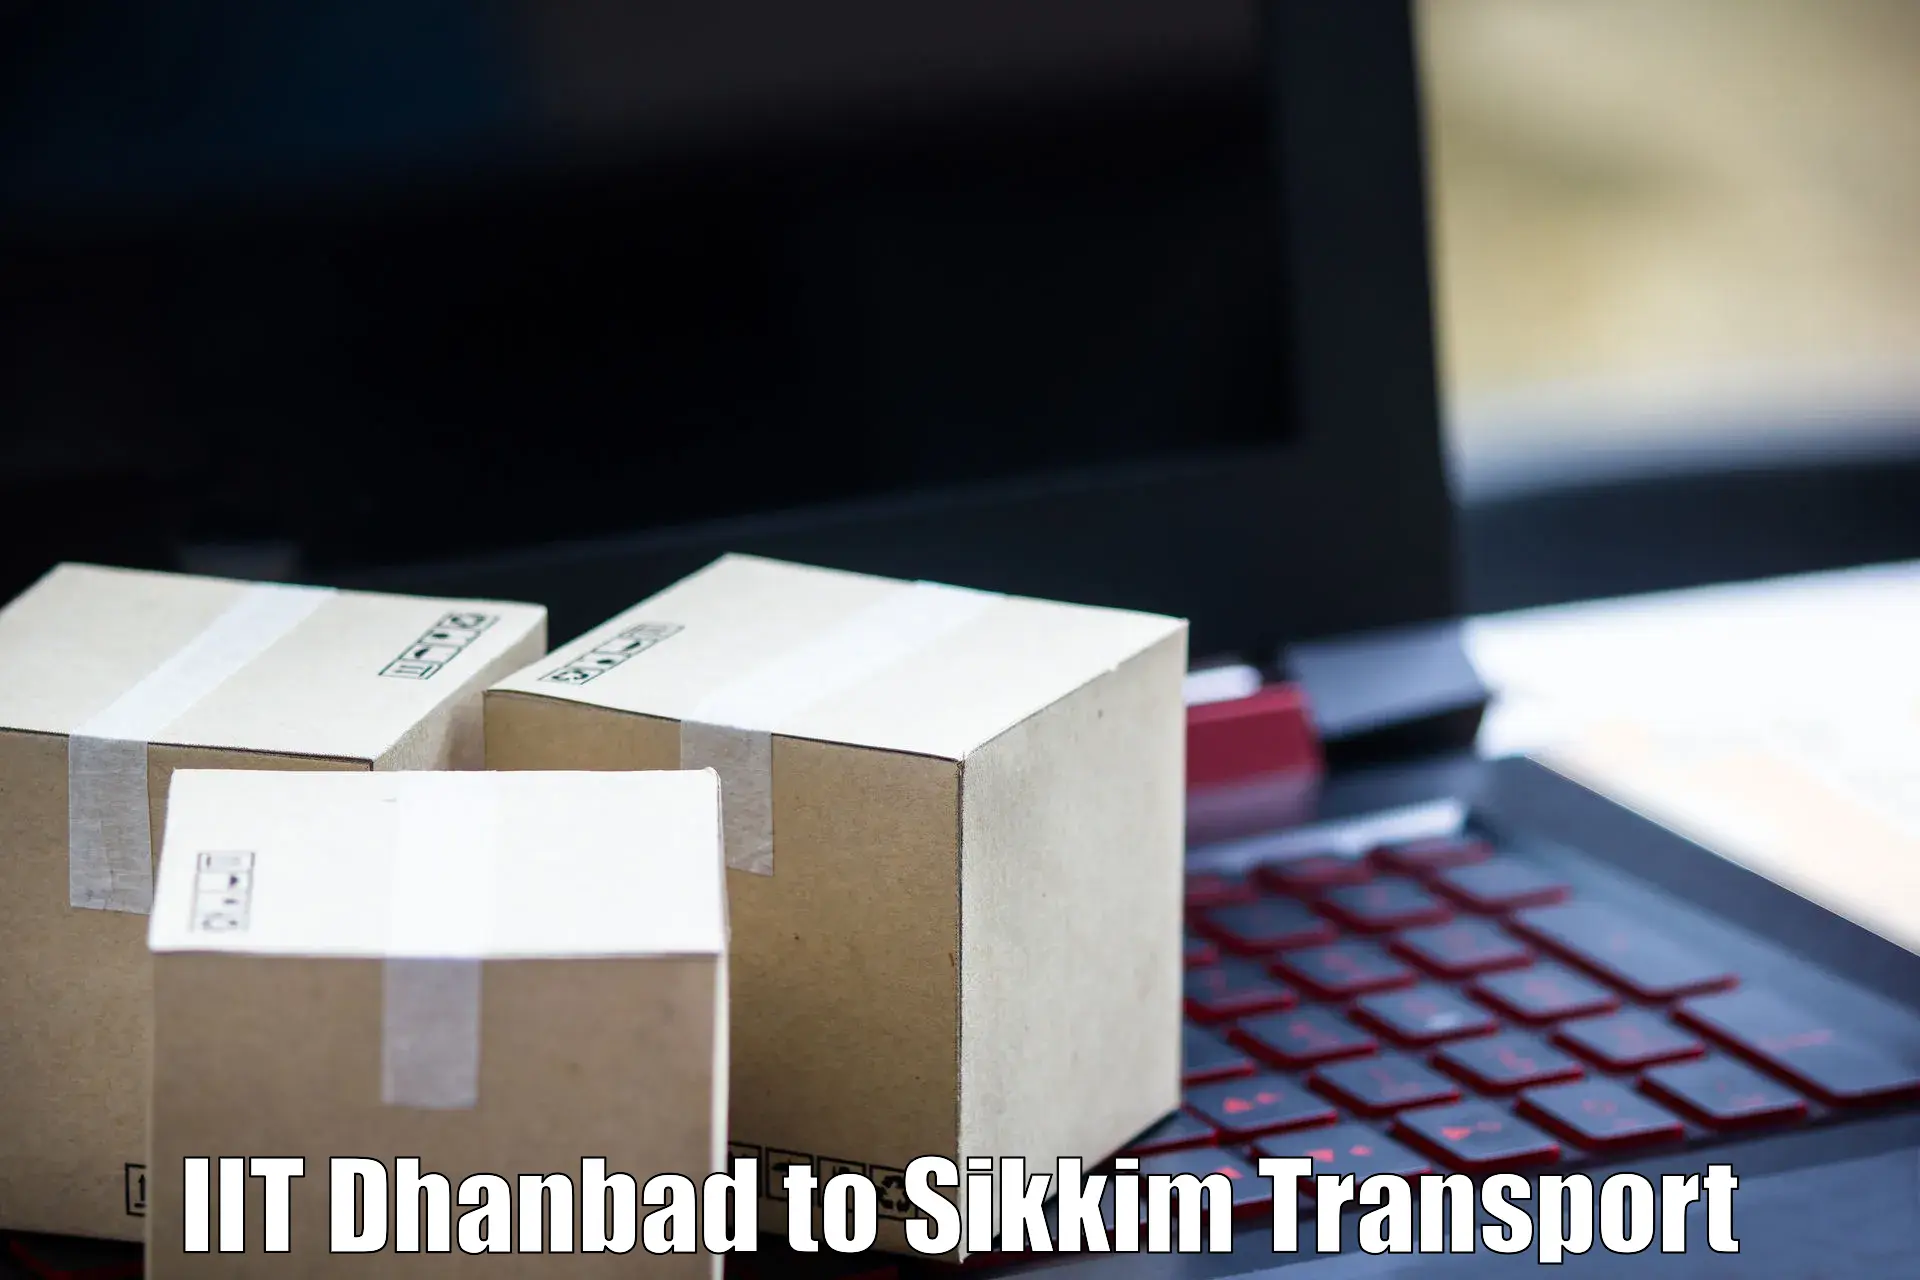 Container transport service IIT Dhanbad to Pelling